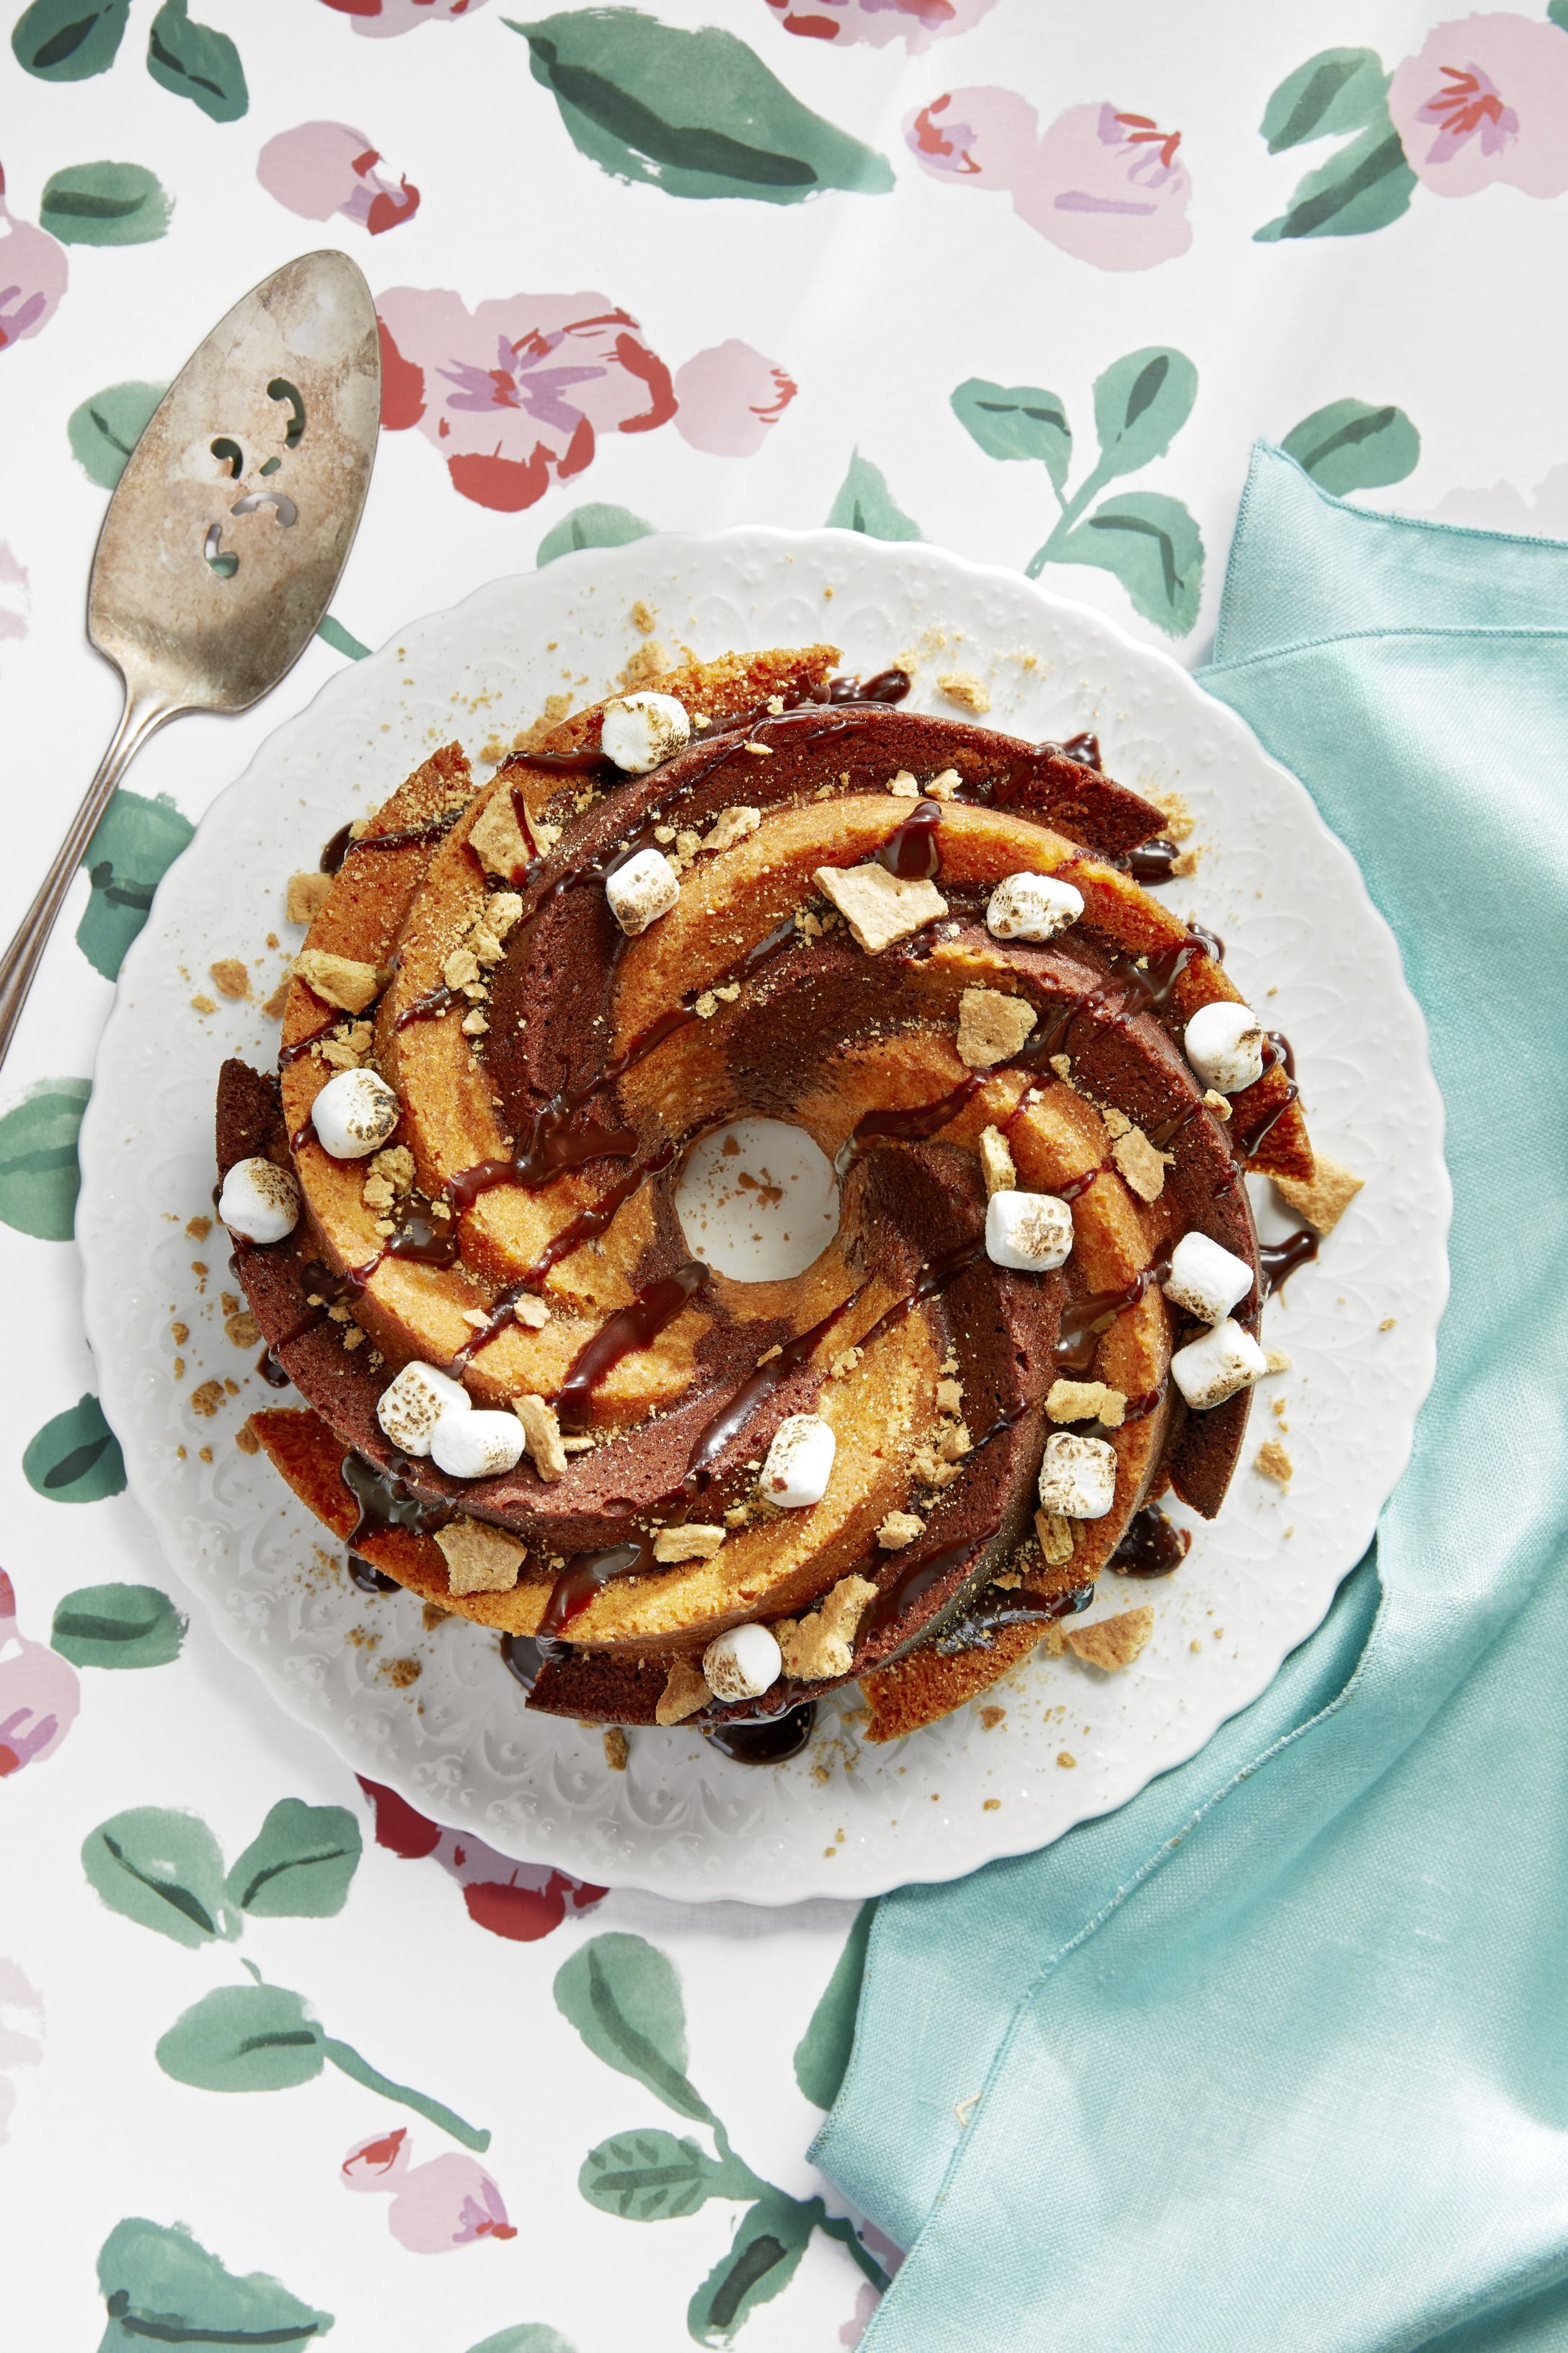 Check Out These Delicious Recipes for the Best Bundt Cakes!